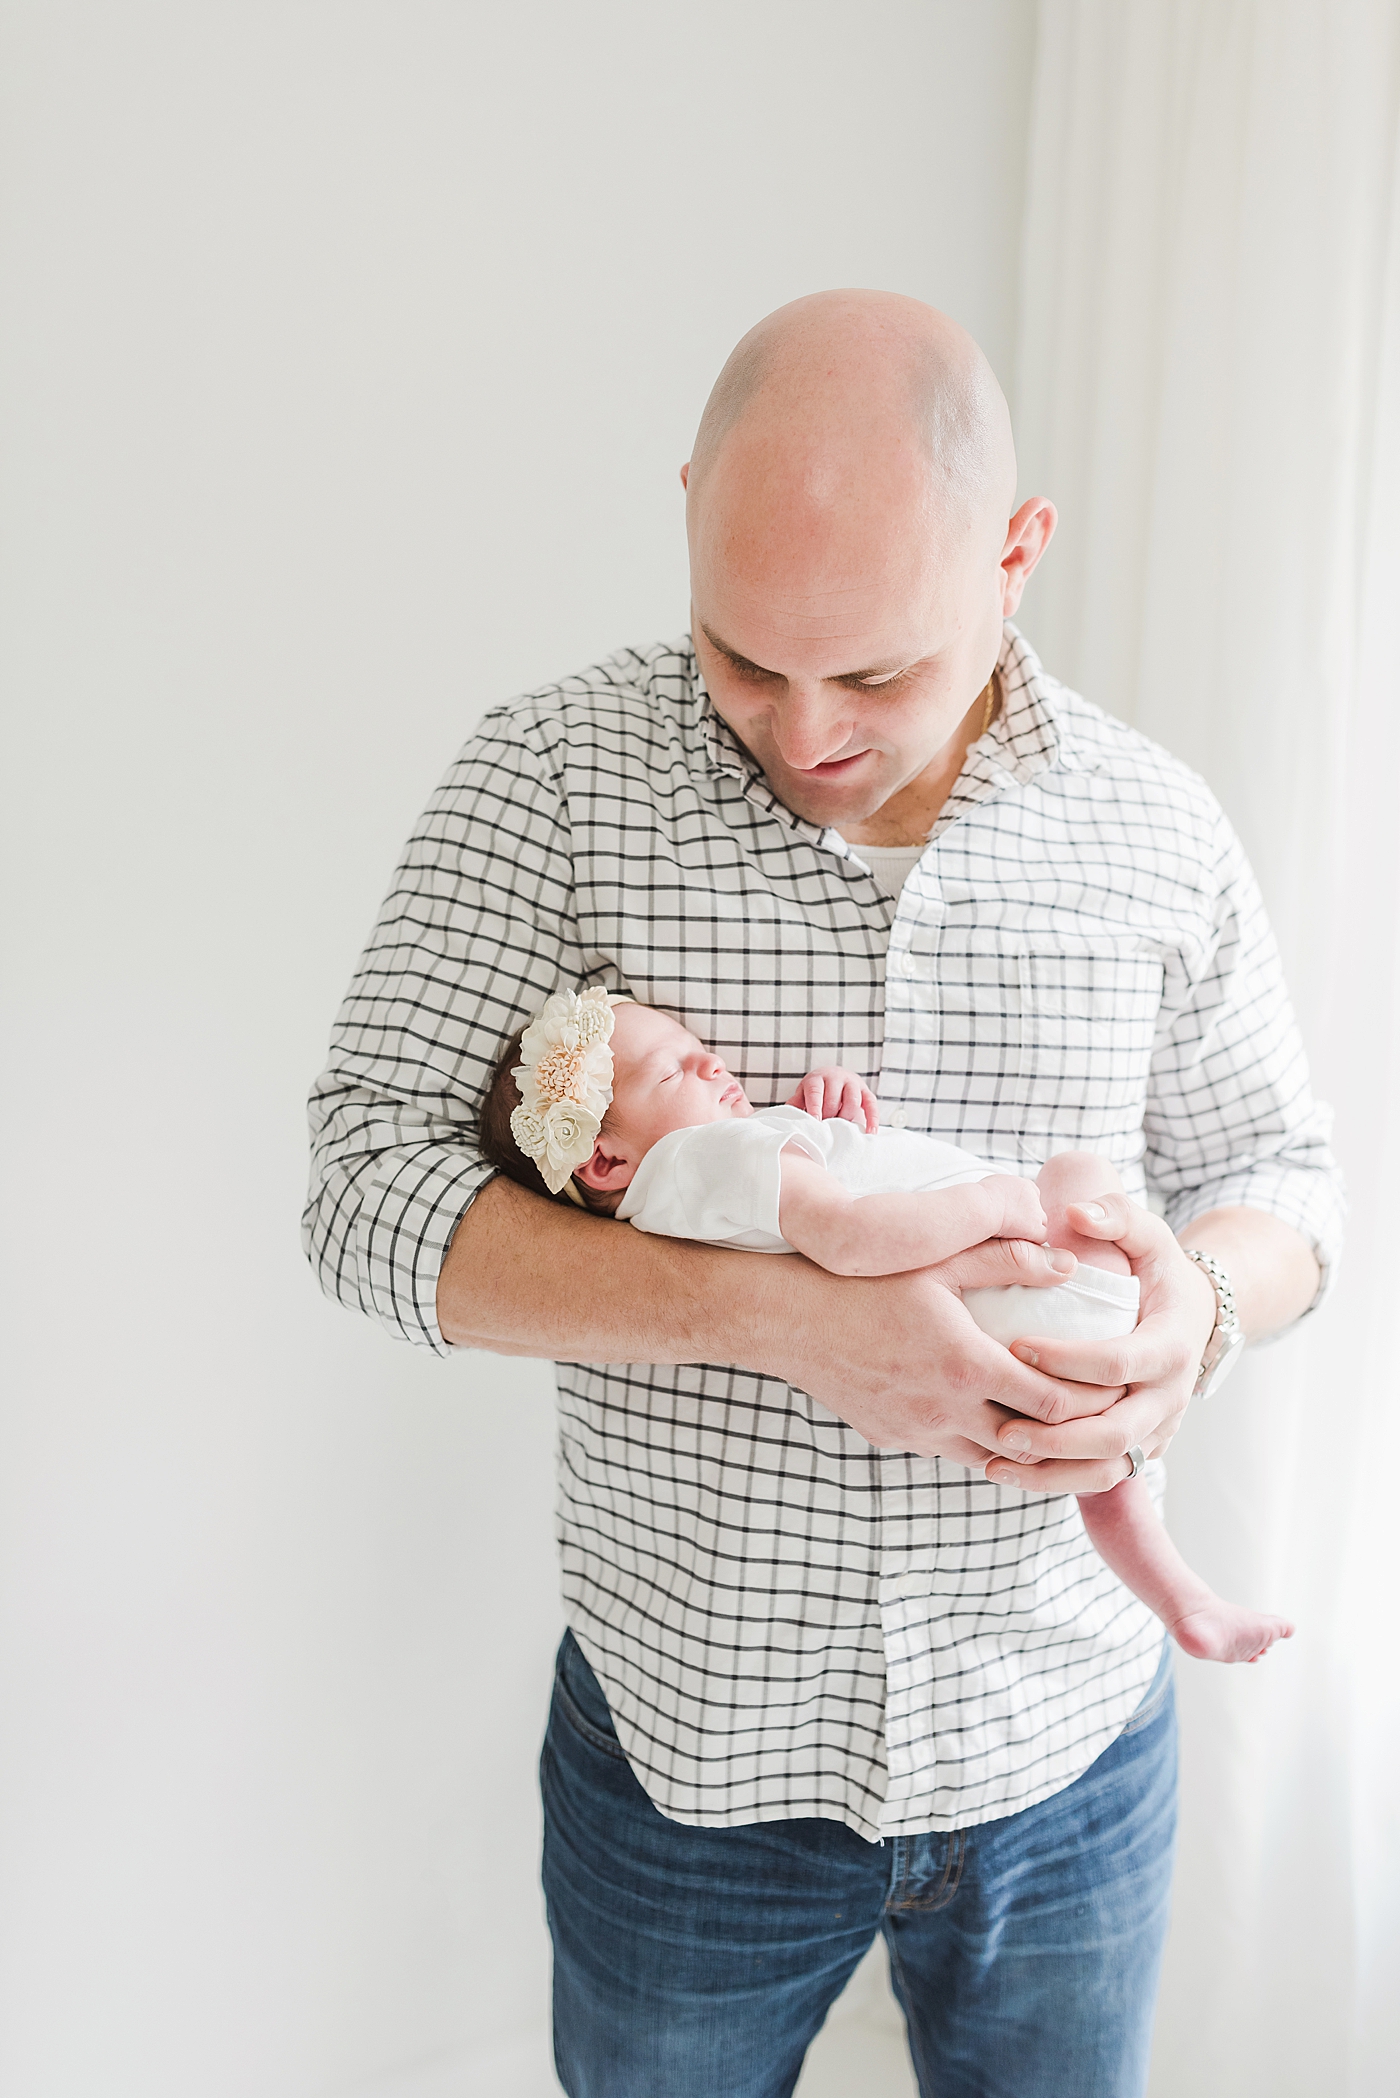 Dad holding his newborn baby girl | Photo by Anna Wisjo Photography